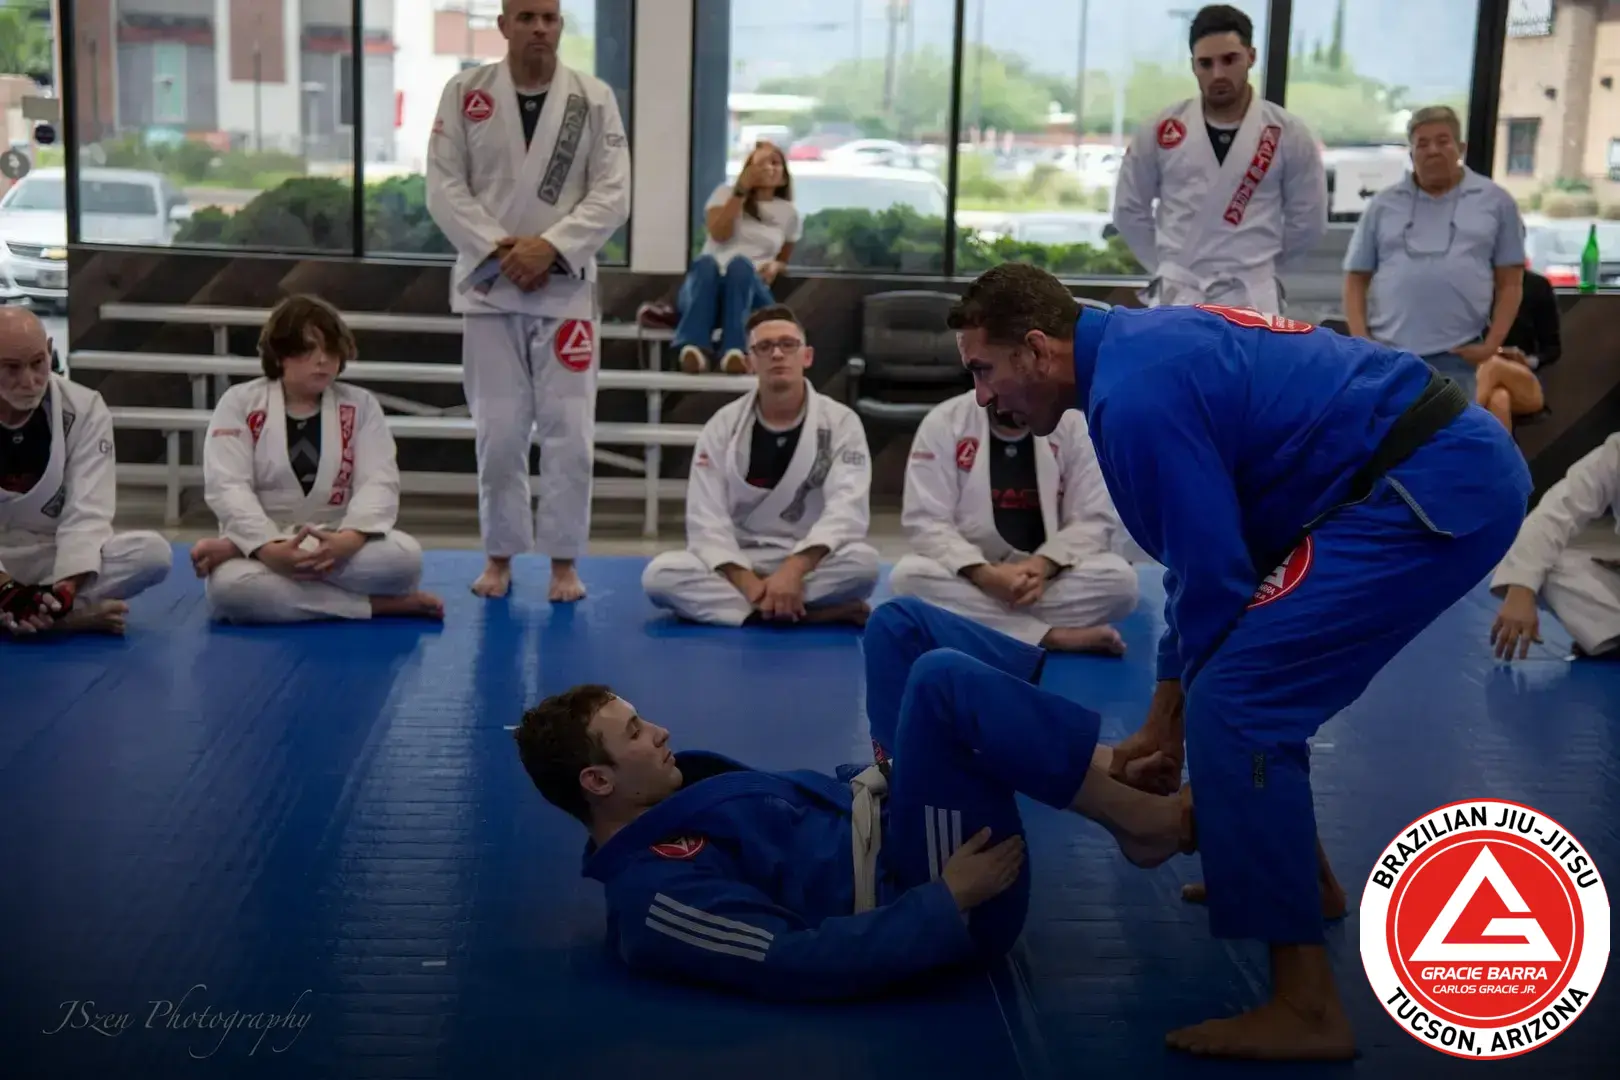 Why do I feel so good after BJJ?